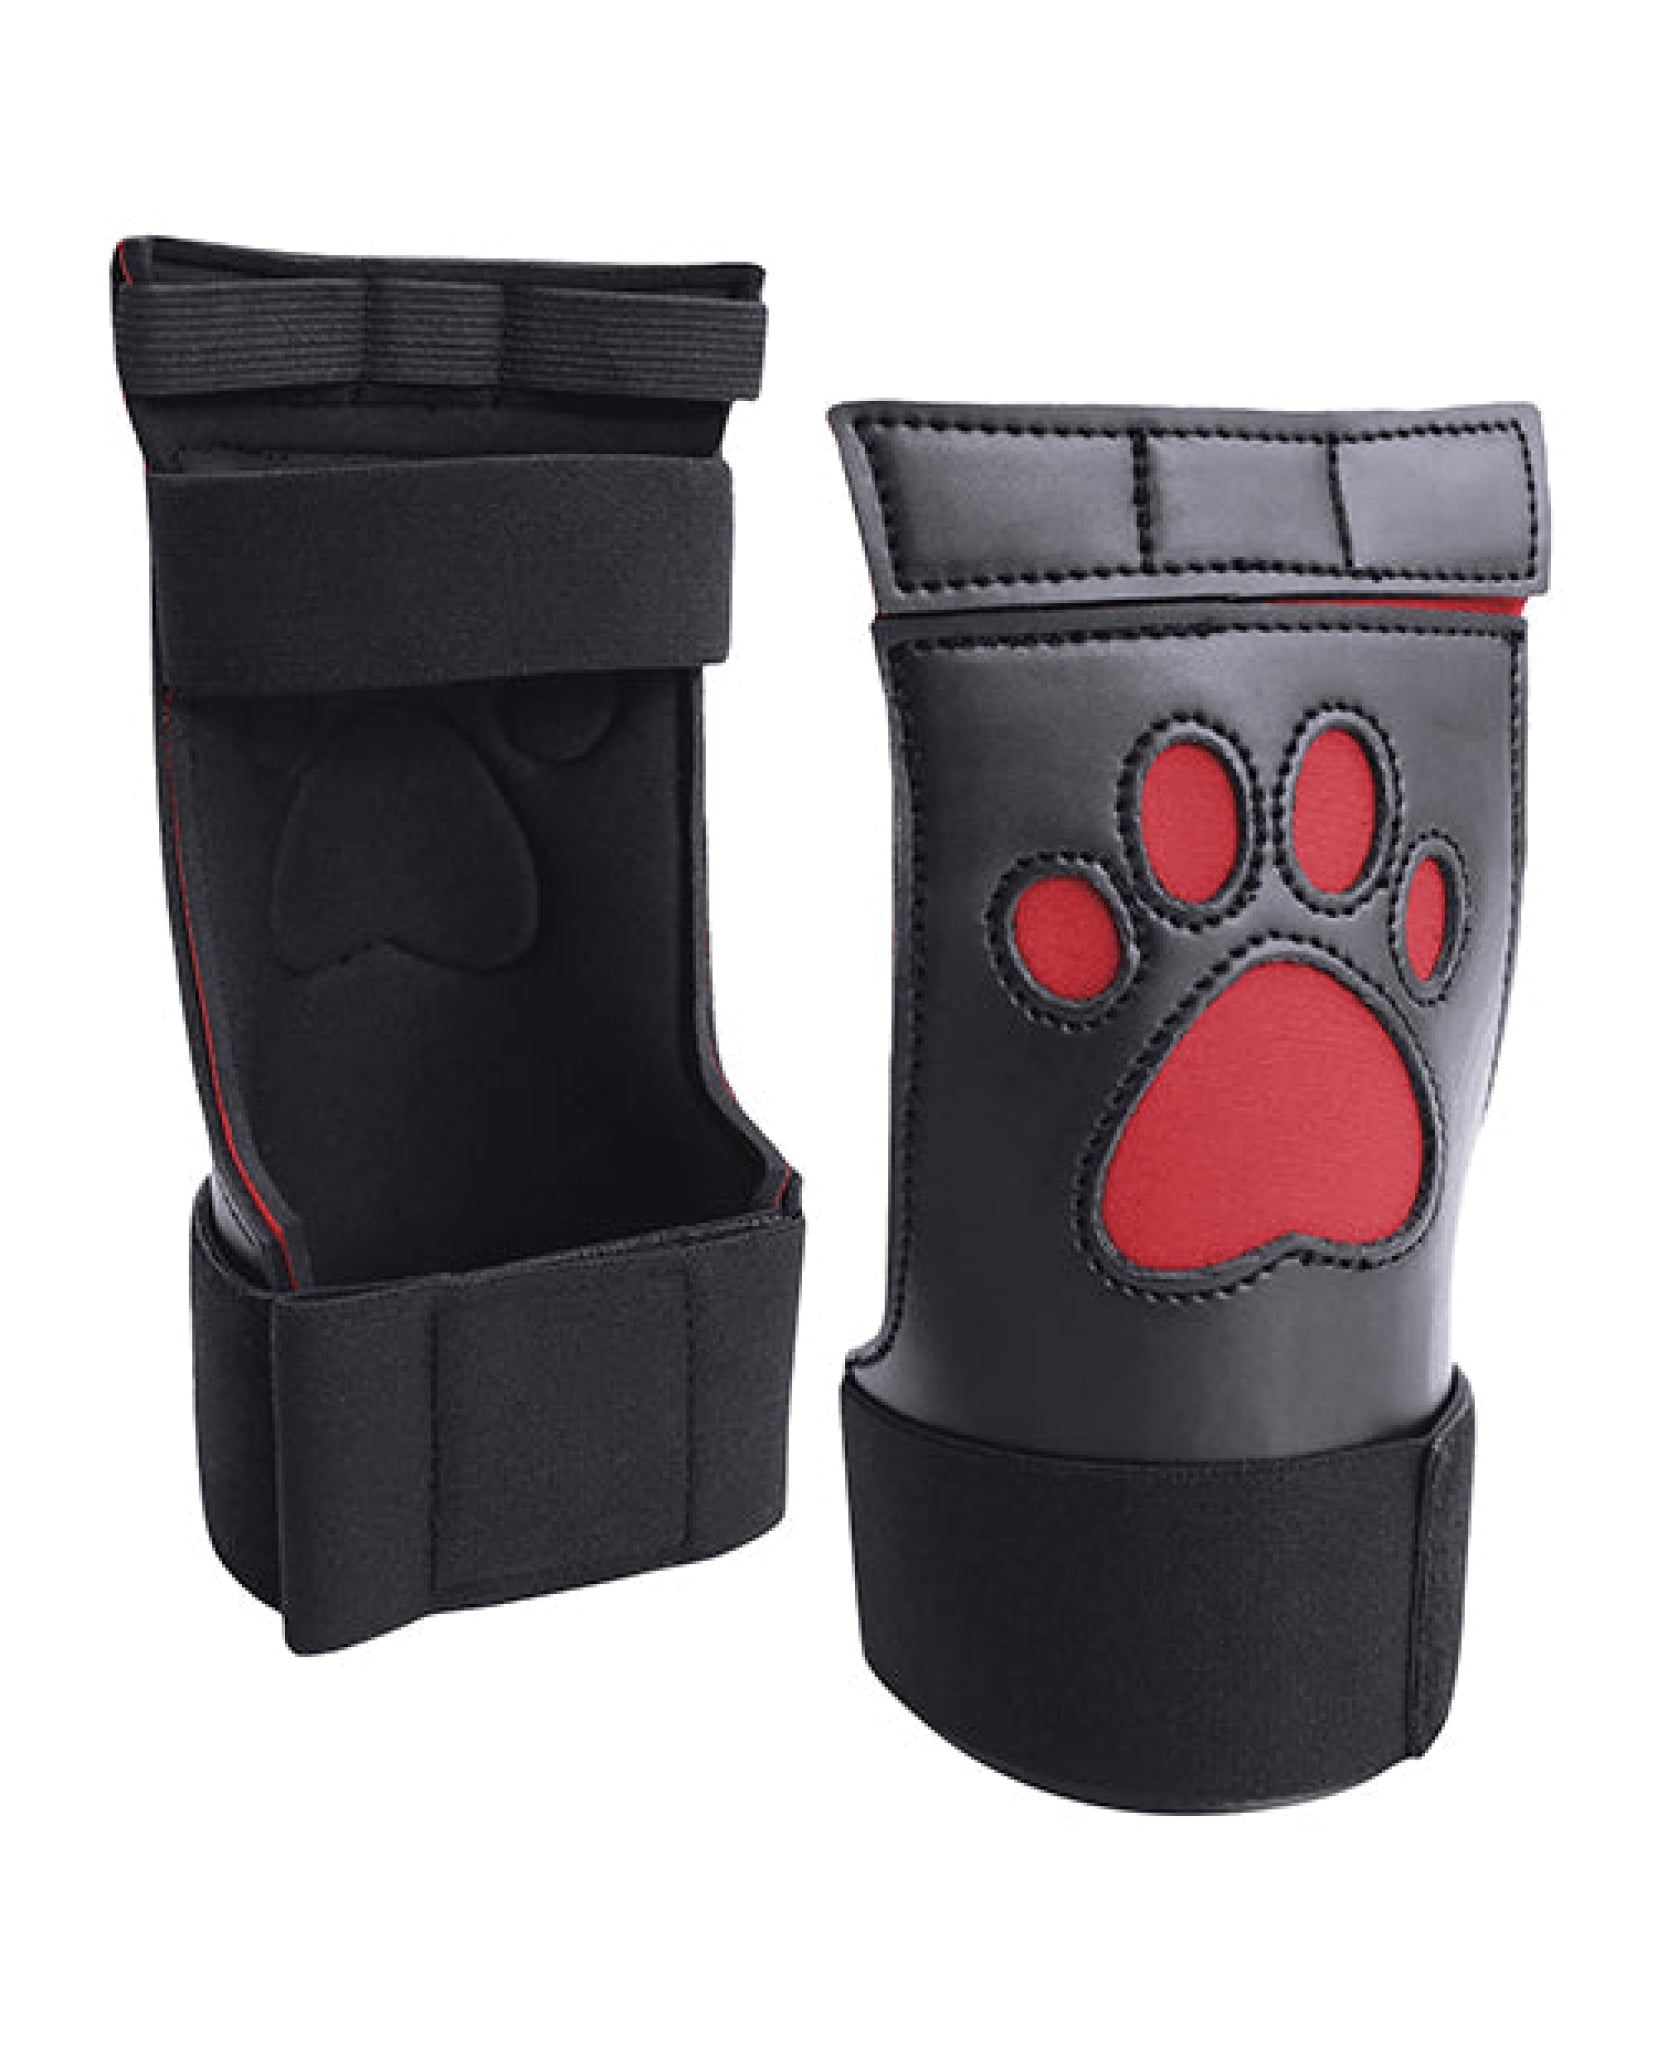 Shots Ouch Puppy Play Puppe Play Paw Cut-out Gloves Shots America LLC